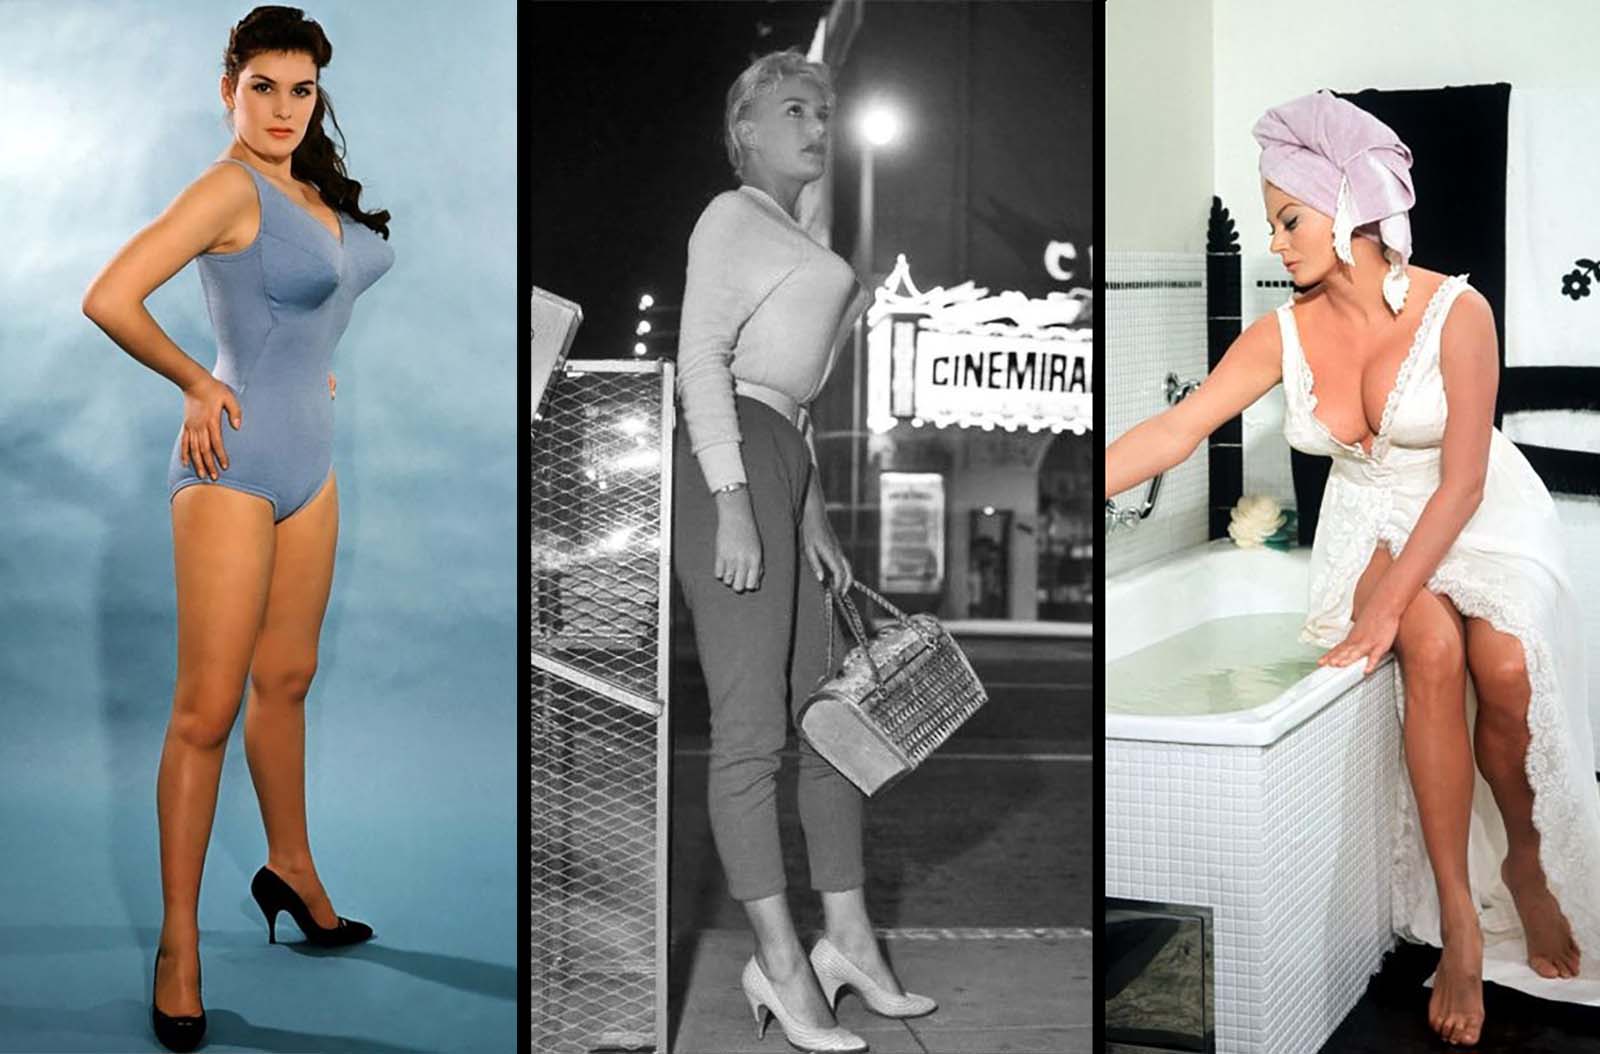 A Classic Bombshell: Glamorous Photos of June Wilkinson in the 1950s and 1960s